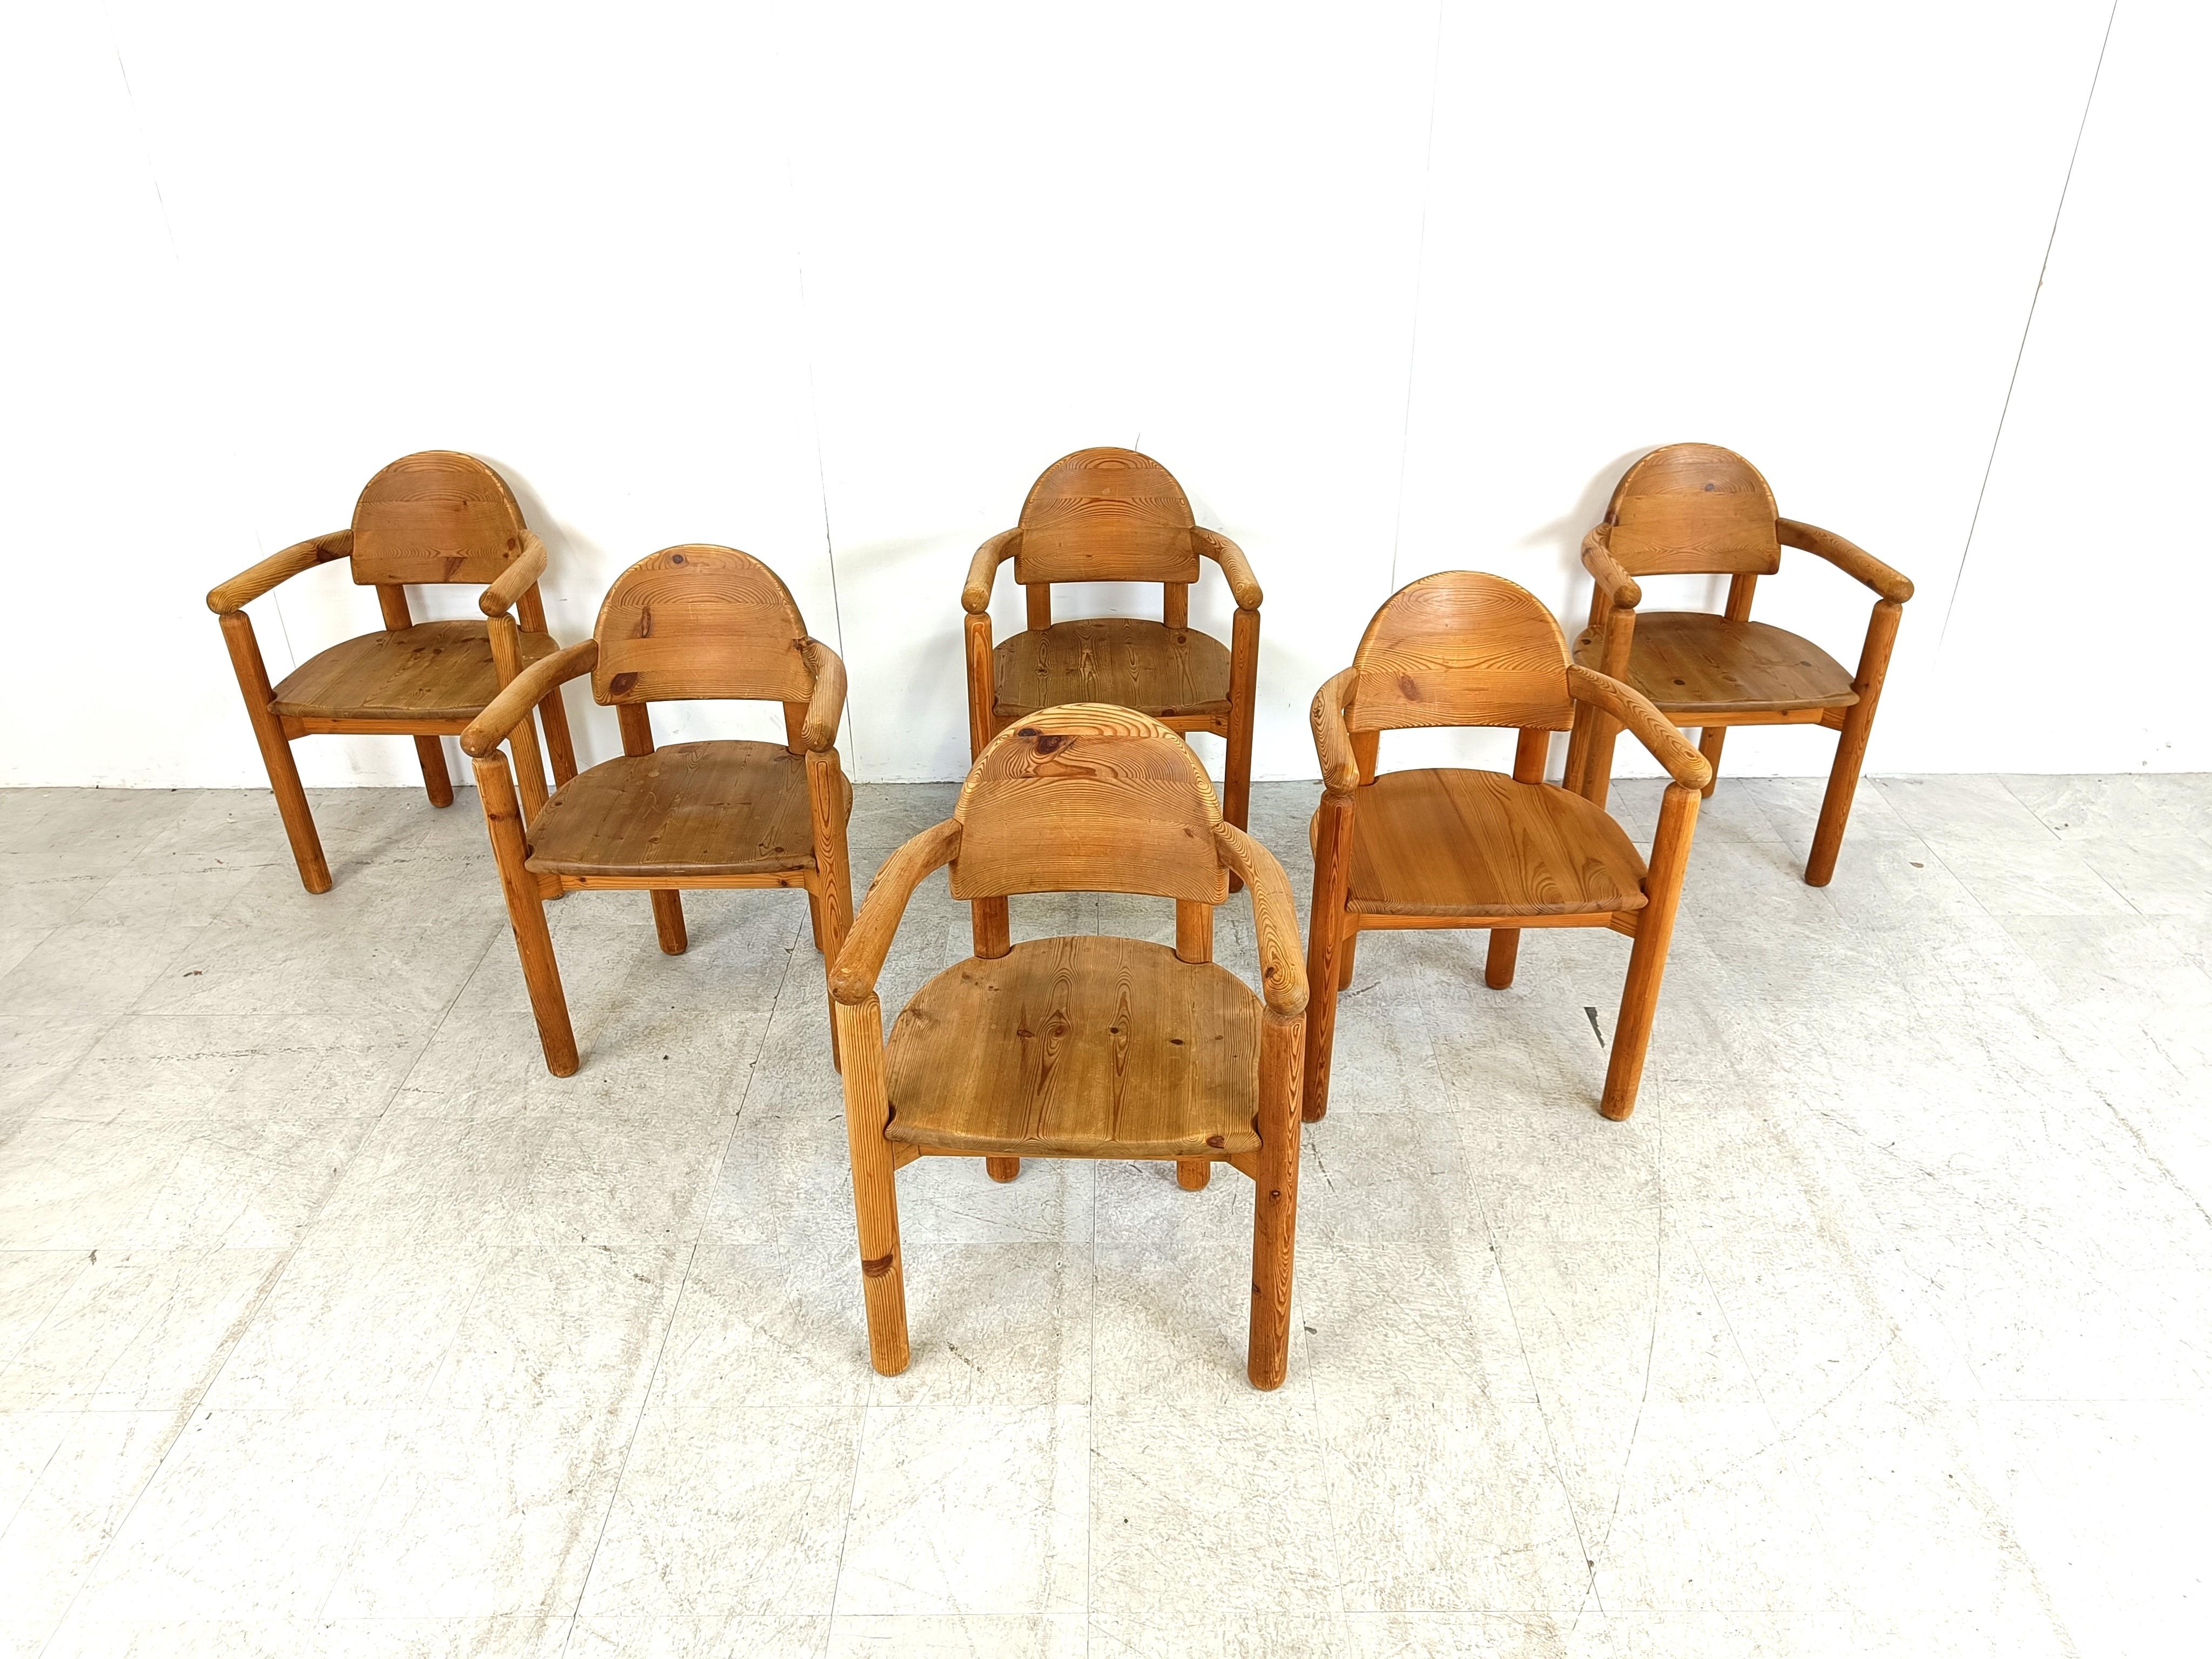 Set of 6 scandinavian solid pine wood dining chairs by Rainer Daumiller for  Hirtshals Savvaerk

The chairs are in good condition.

Nicely shaped armrests and seats.

Beautiful timeless design.

Good original condition with normal age related